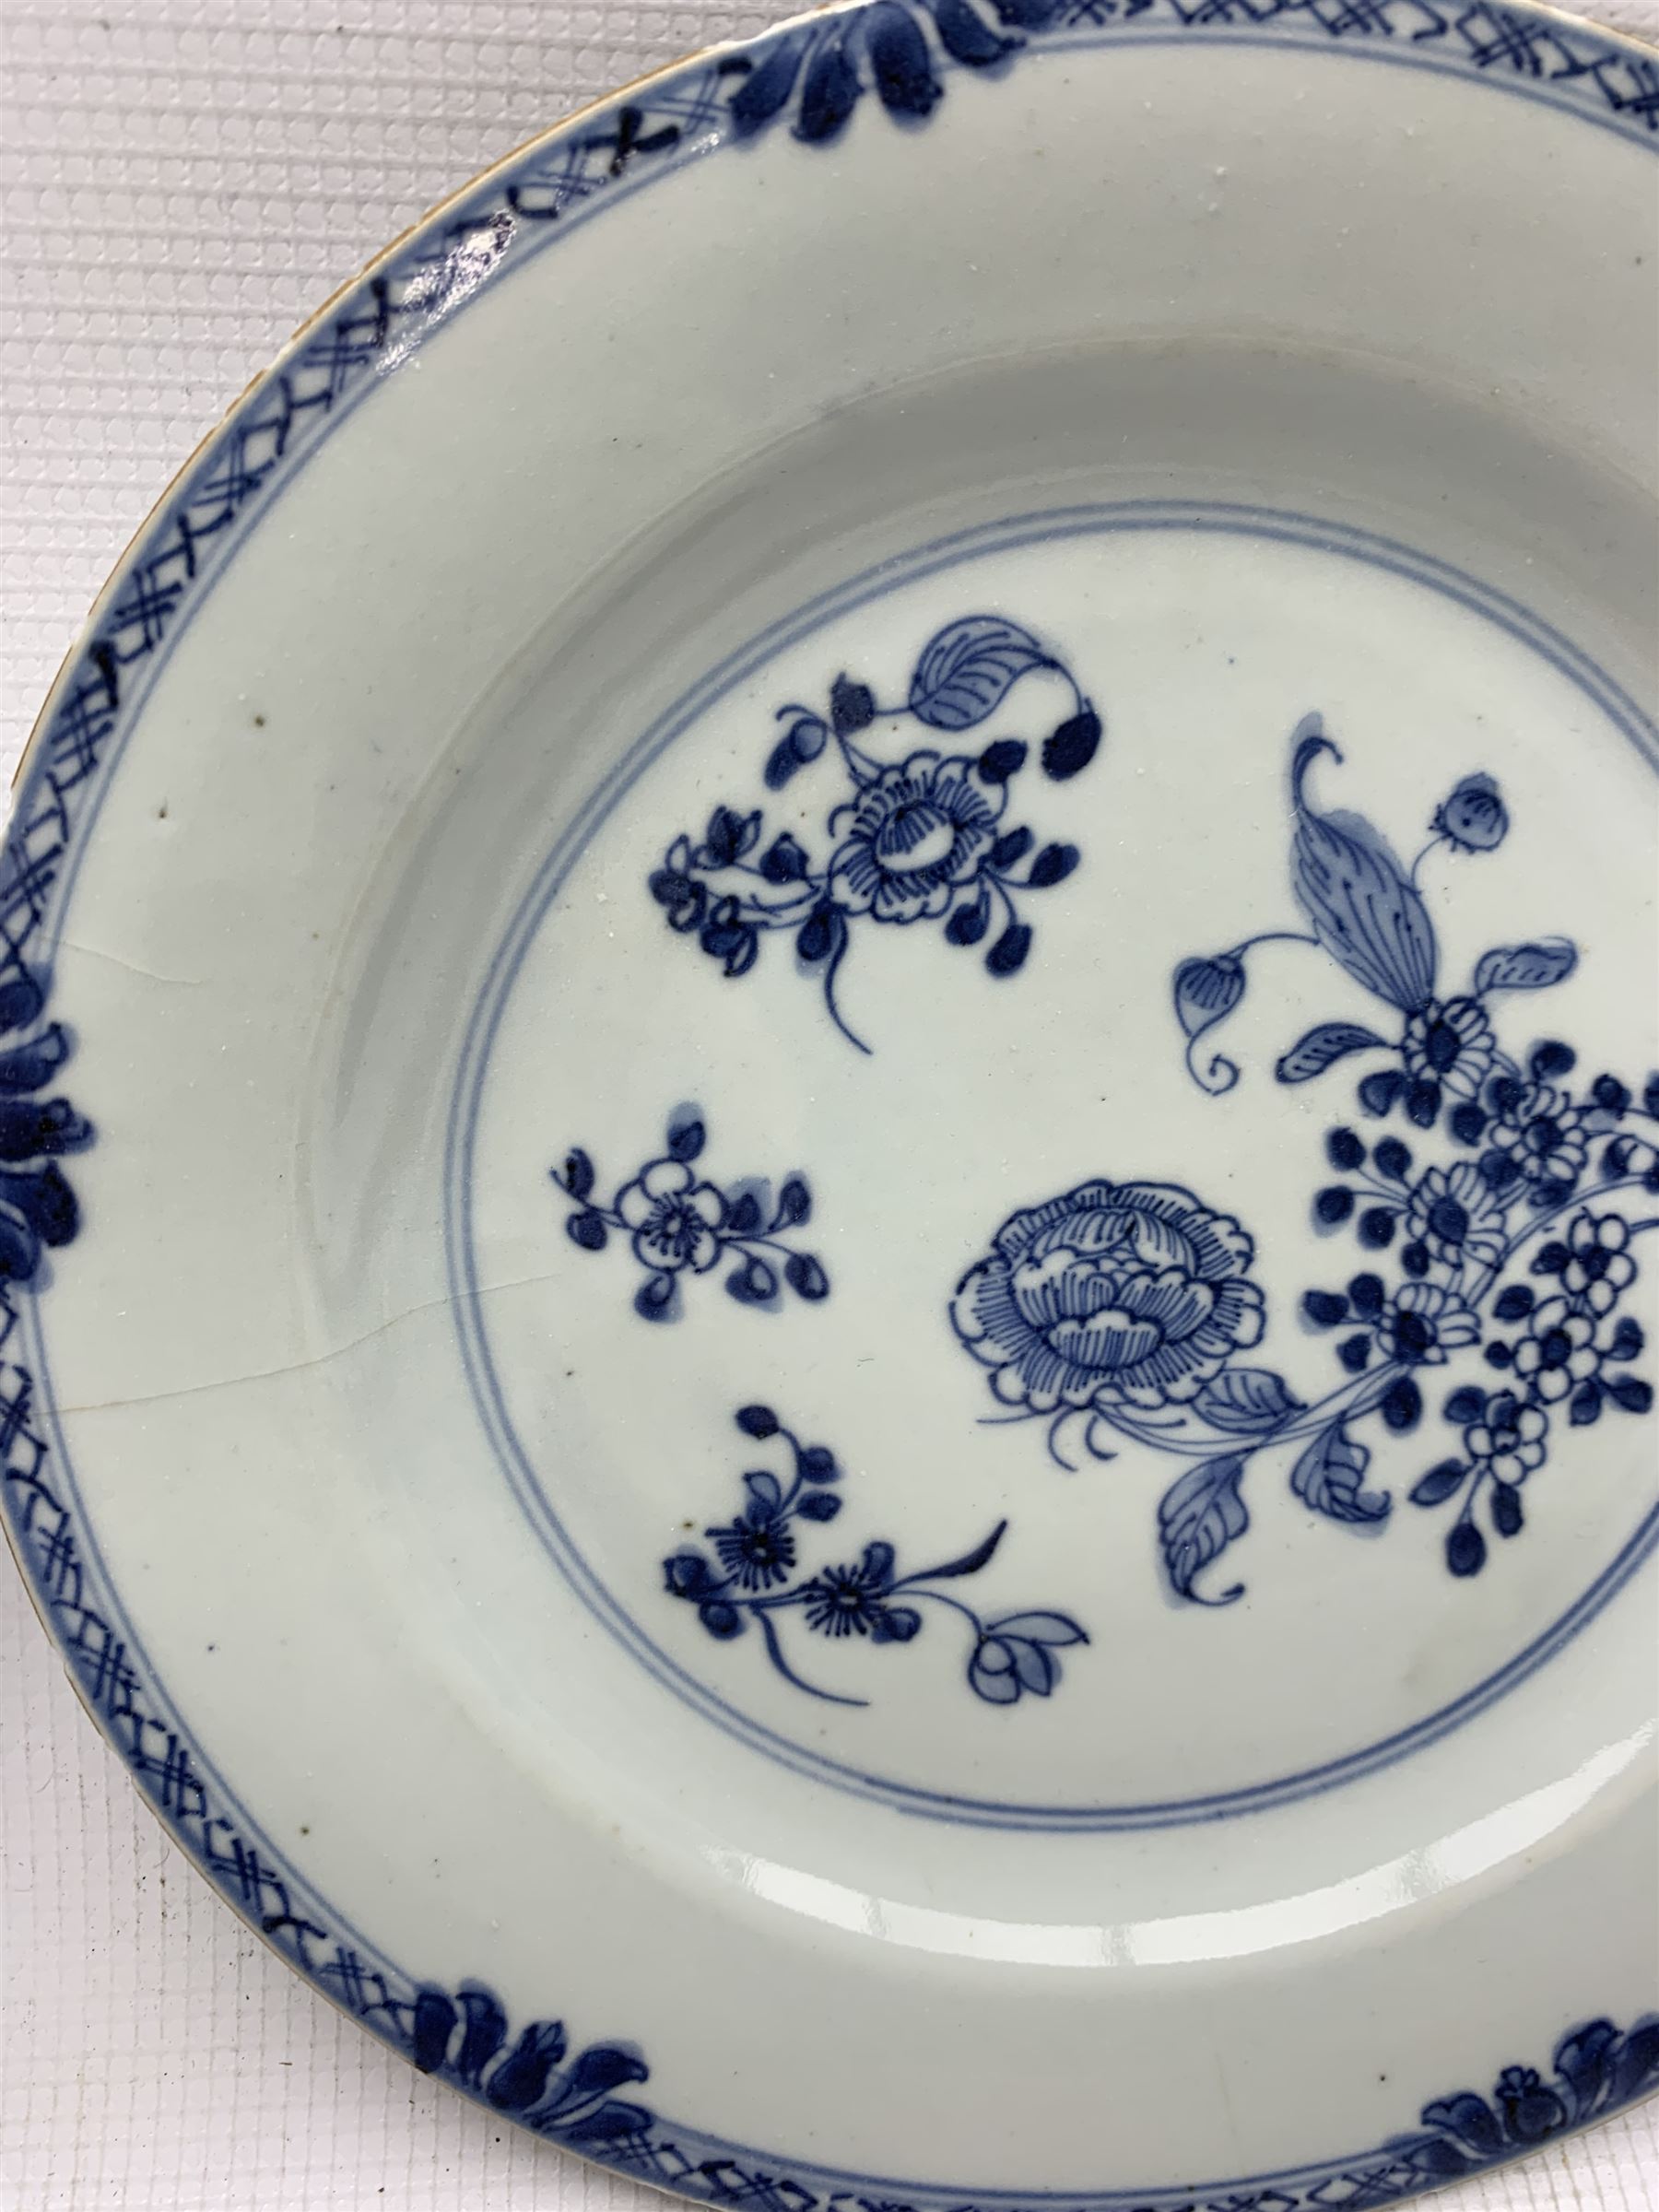 18th century Chinese Export porcelain blue and white charger - Image 7 of 11